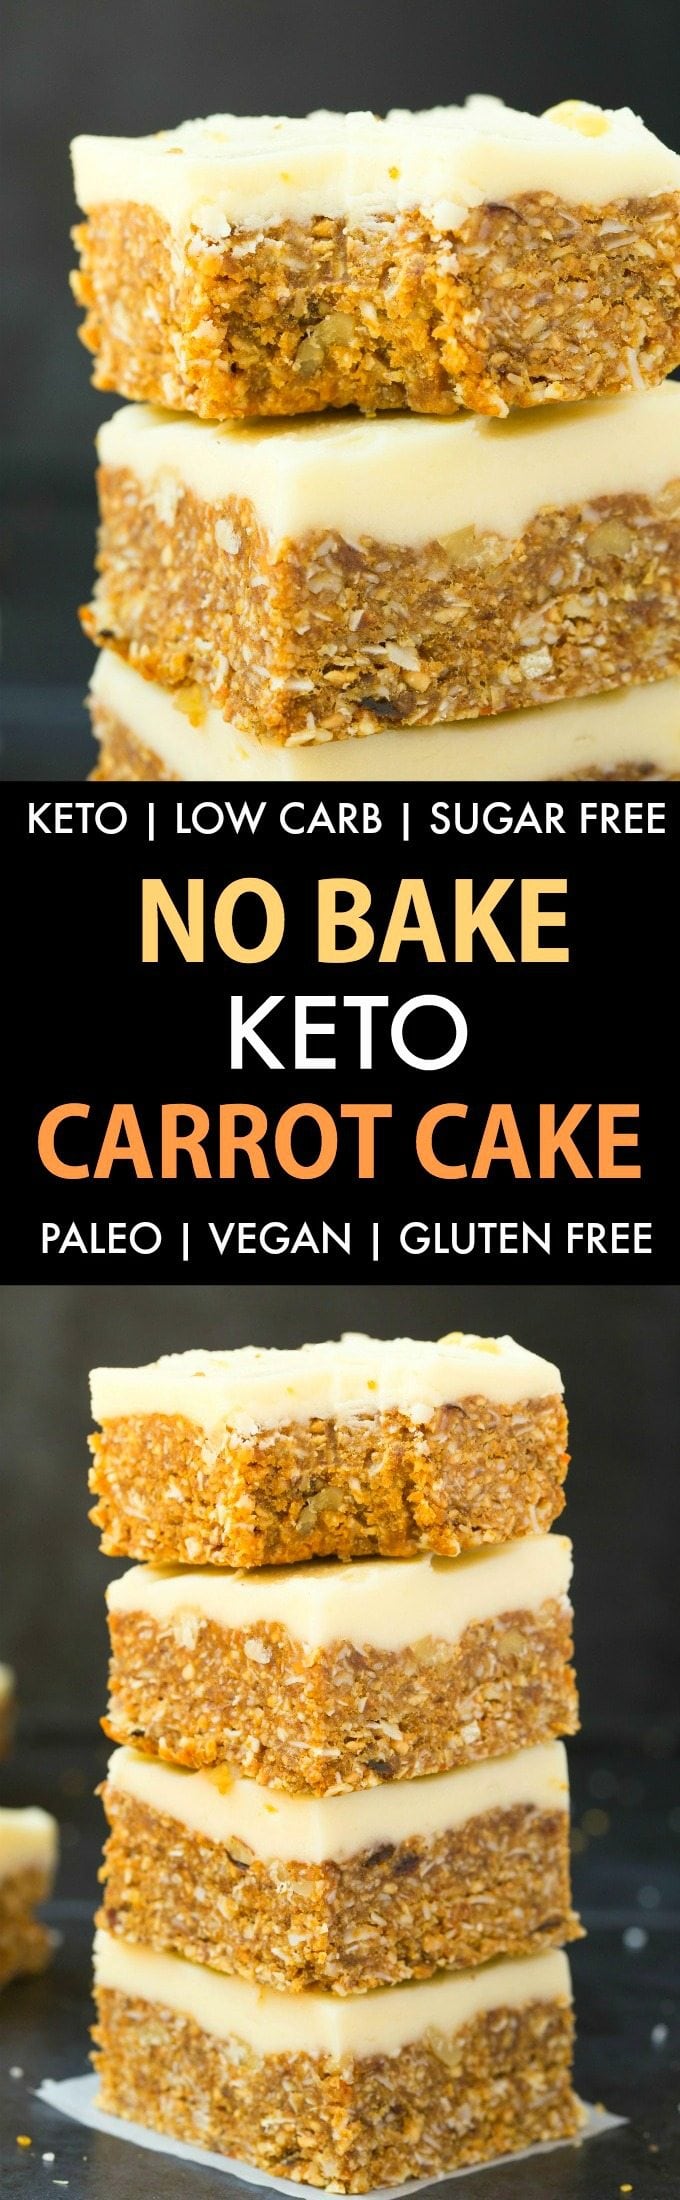 Healthy No Bake Carrot Cake (Keto, Paleo, Low Carb, Vegan)- An easy recipe for a raw no bake carrot cake, topped with a healthy frosting! Naturally sweetened, protein-rich and completely sugar free! #keto #ketosisrecipes #carrotcake #nobake | Recipe on thebigmansworld.com